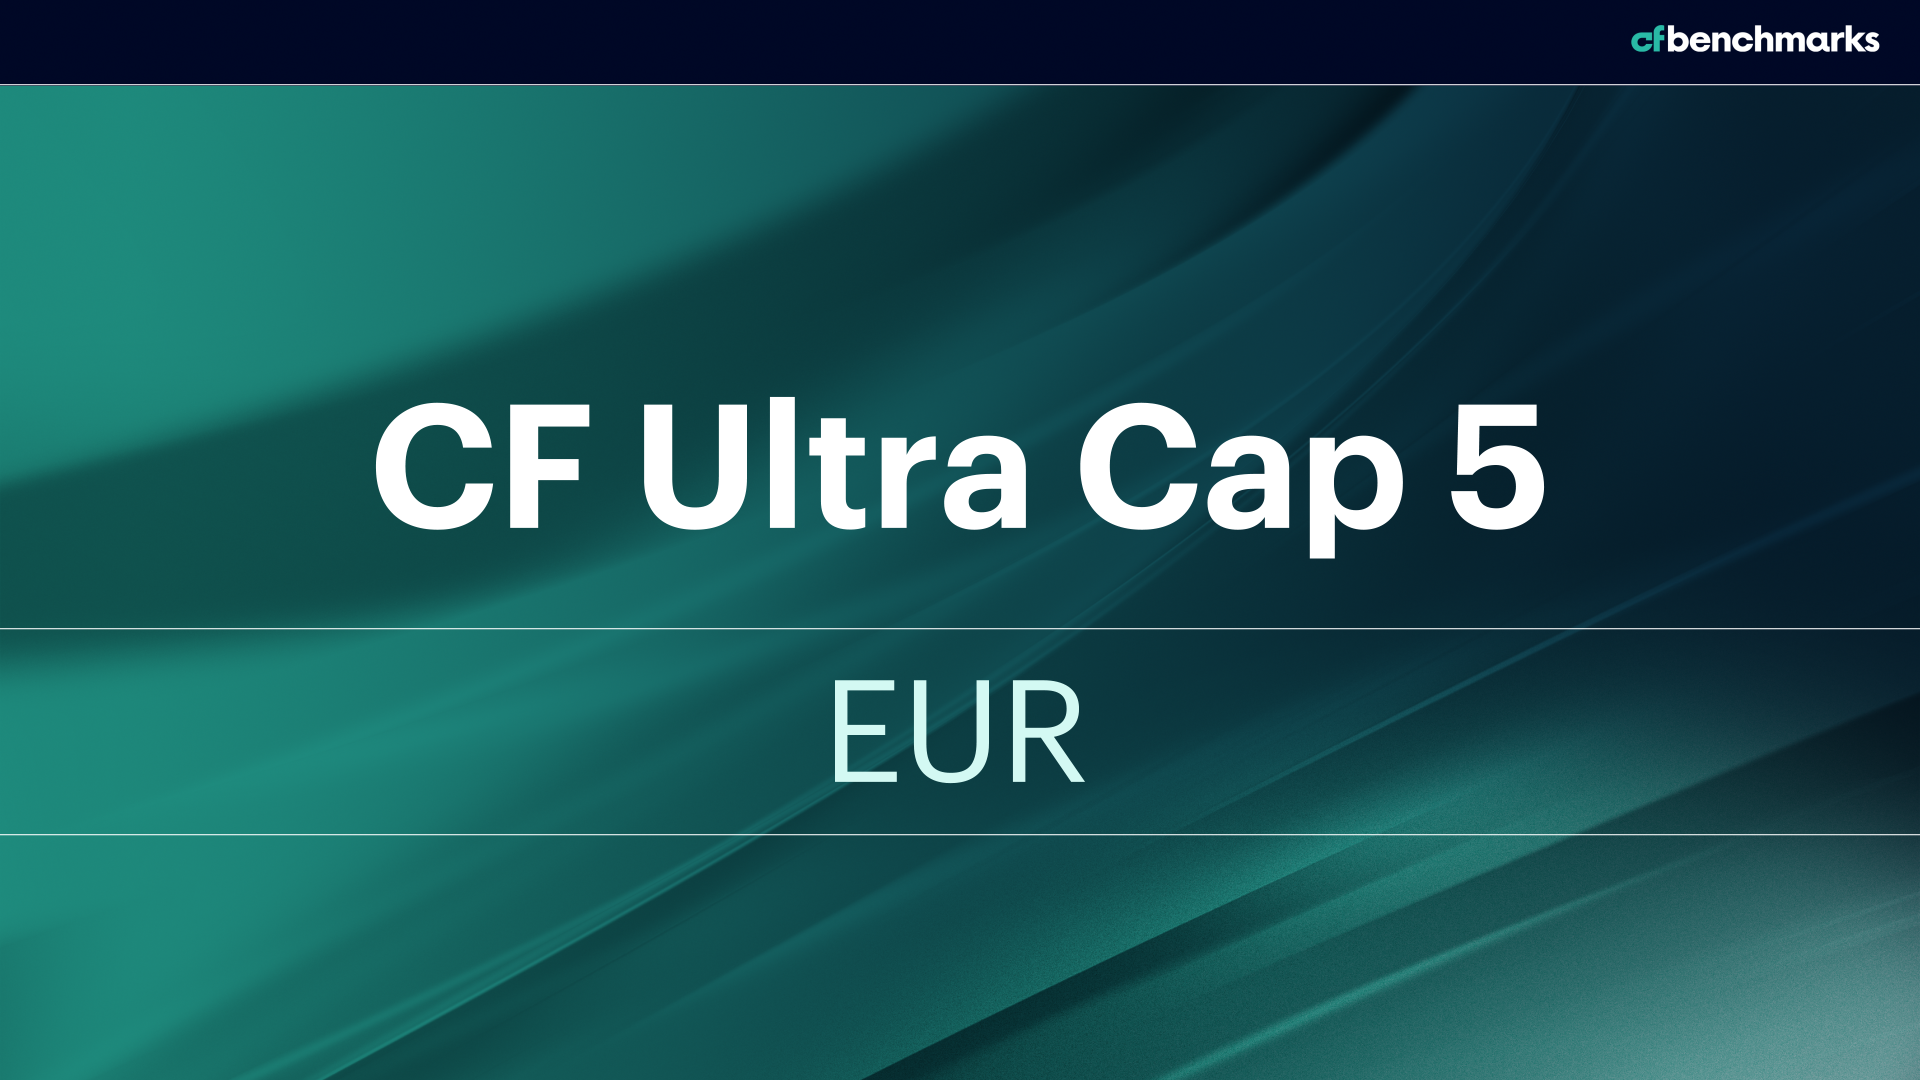 Expansion of CF Digital Asset Index Family to include CF Ultra Cap 5 - EUR Settlement Price, and CF Ultra Cap 5 - EUR Spot Rate